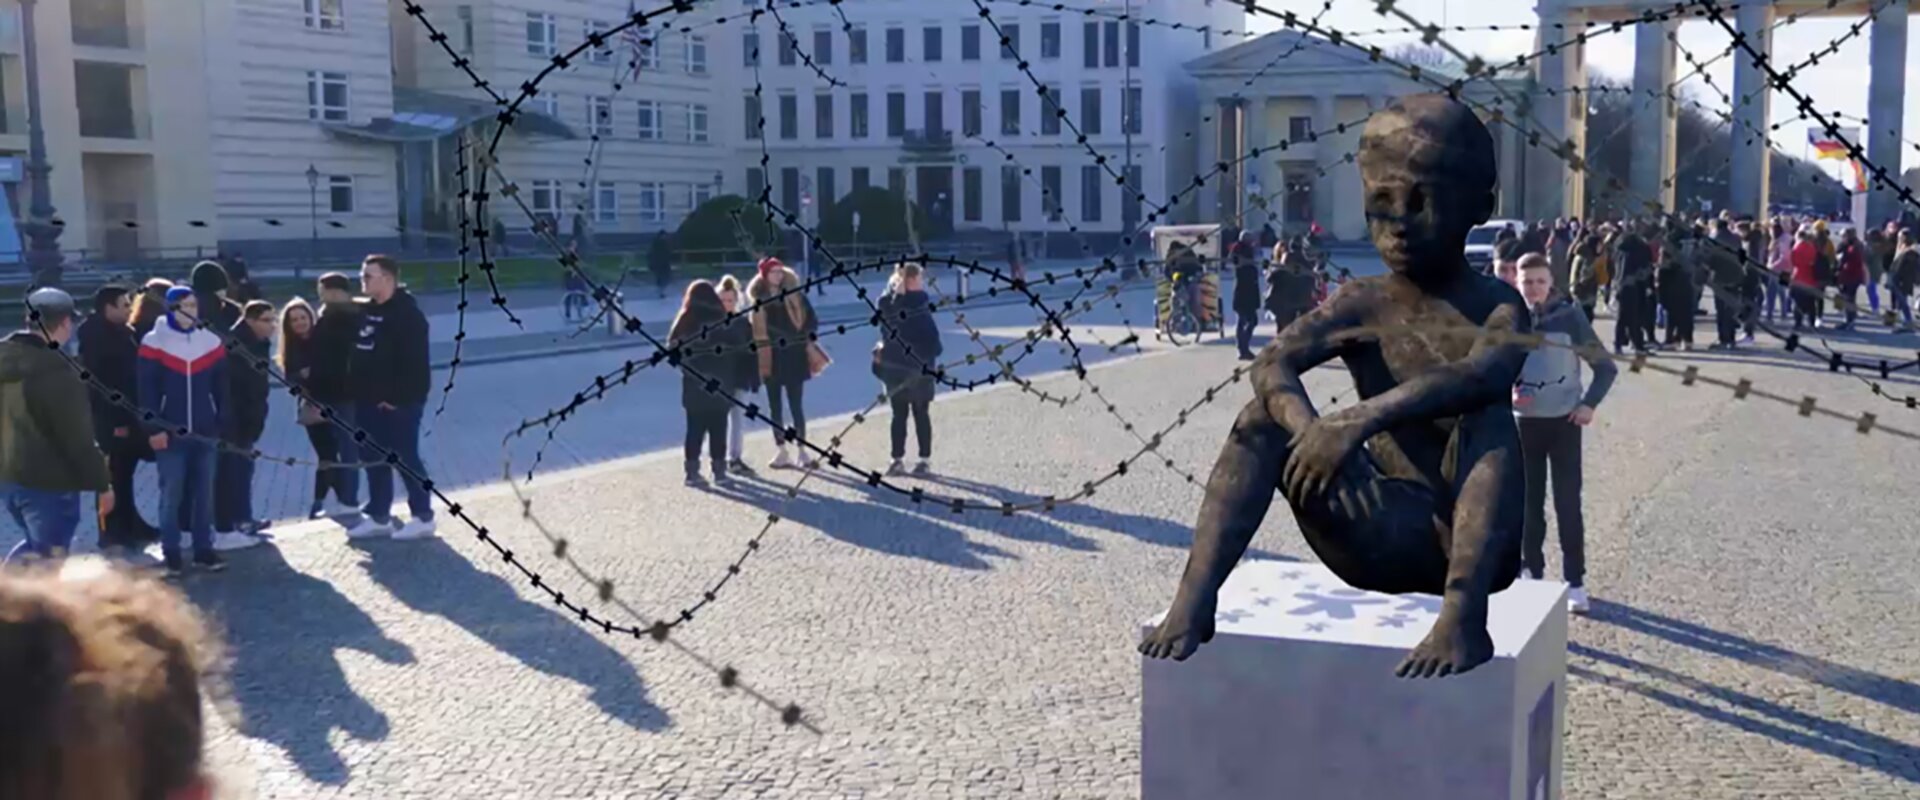 Children’s rights as virtual sculptures